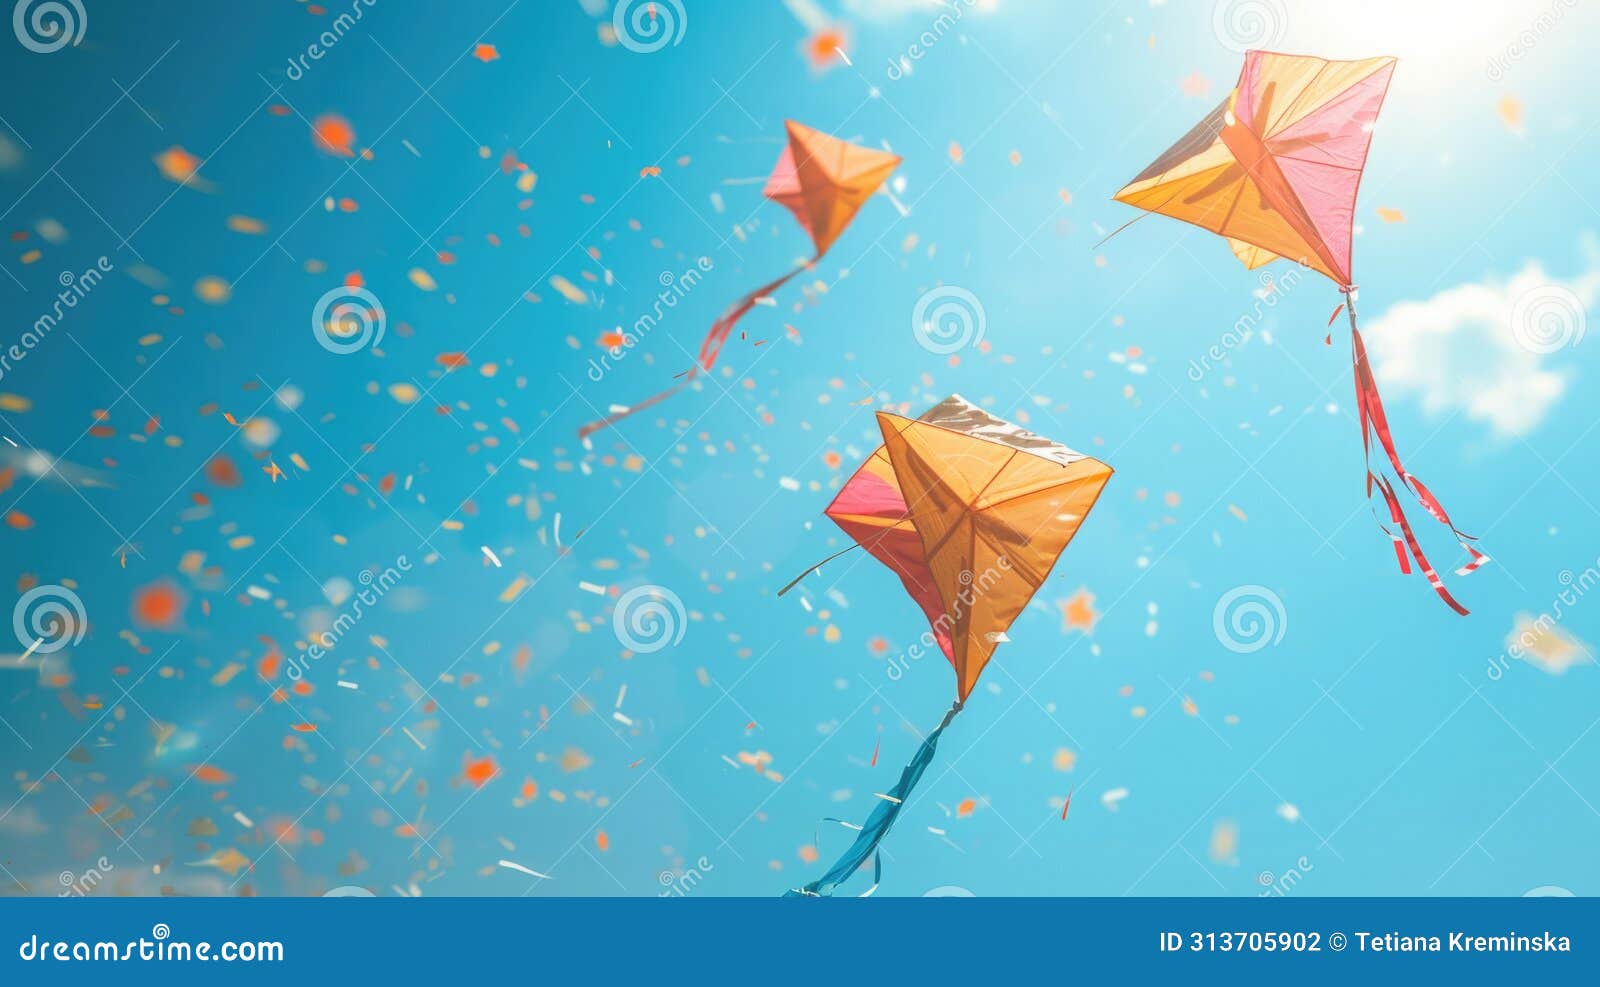 a kite flying against a clear blue sky, is a popular sinhalese new year activity. the kites are brightly colored